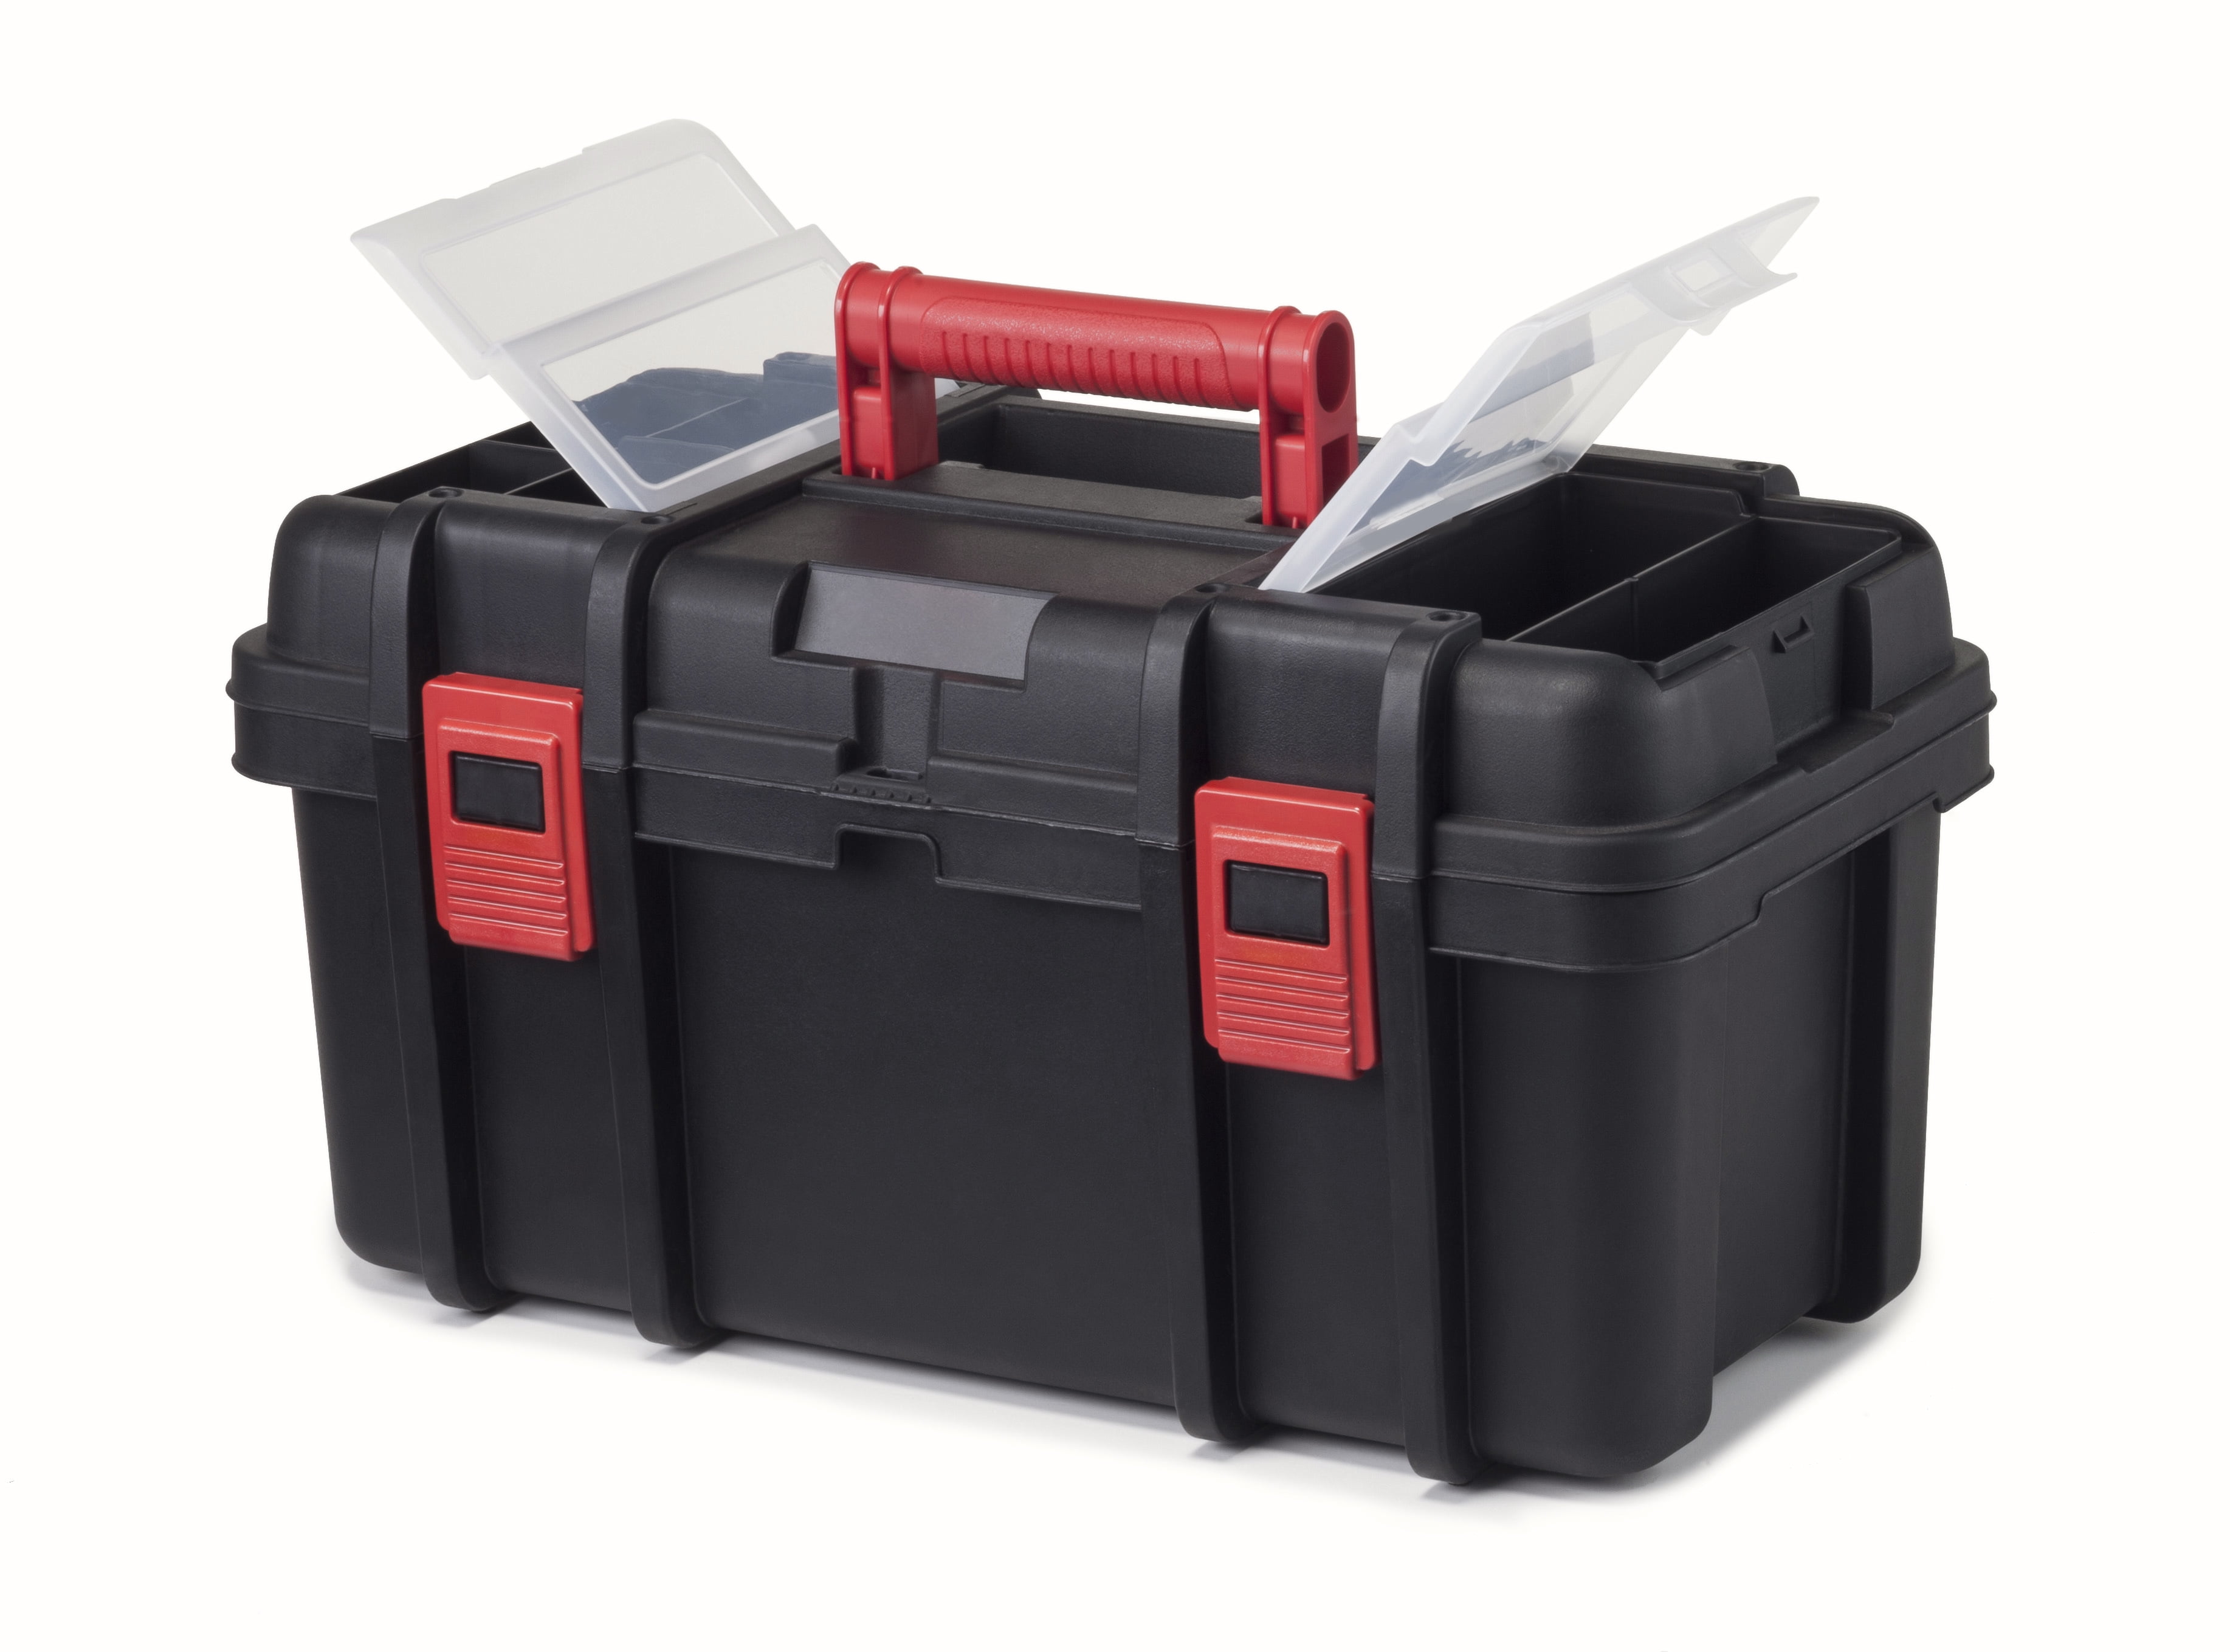 10-inch Portable Reinforced Compression Auto Repair Parts Tool Box Plastic  Hardware Tool Box Home Storage